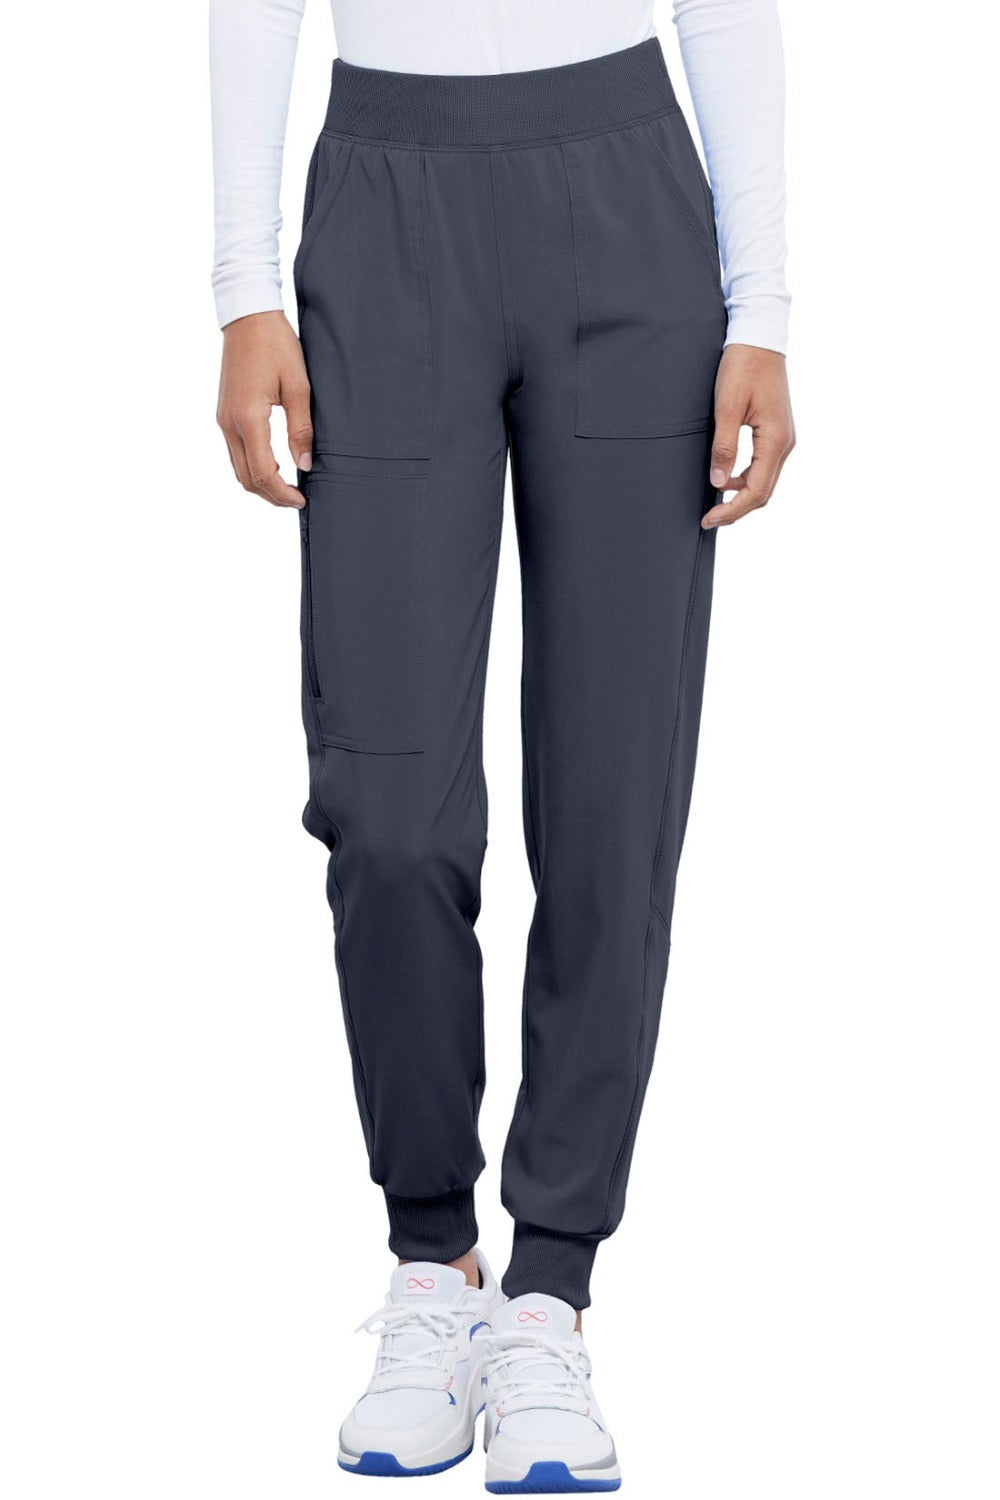 Cherokee Allura Petite Scrub Pant Pull On Jogger in Pewter at Parker's Clothing and Shoes.